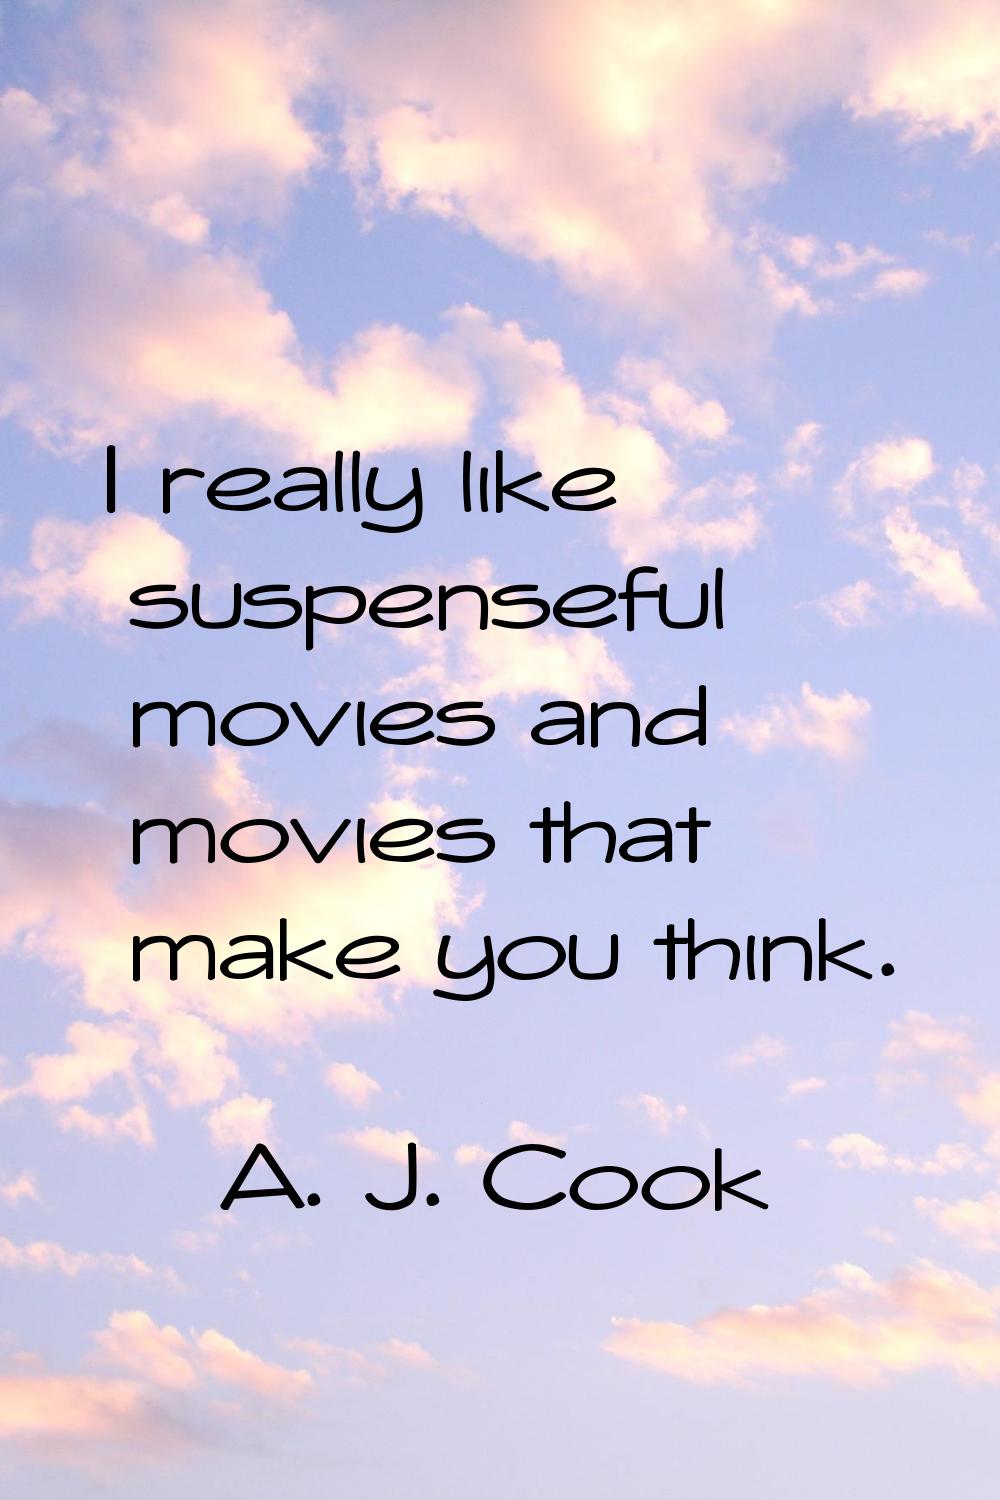 I really like suspenseful movies and movies that make you think.